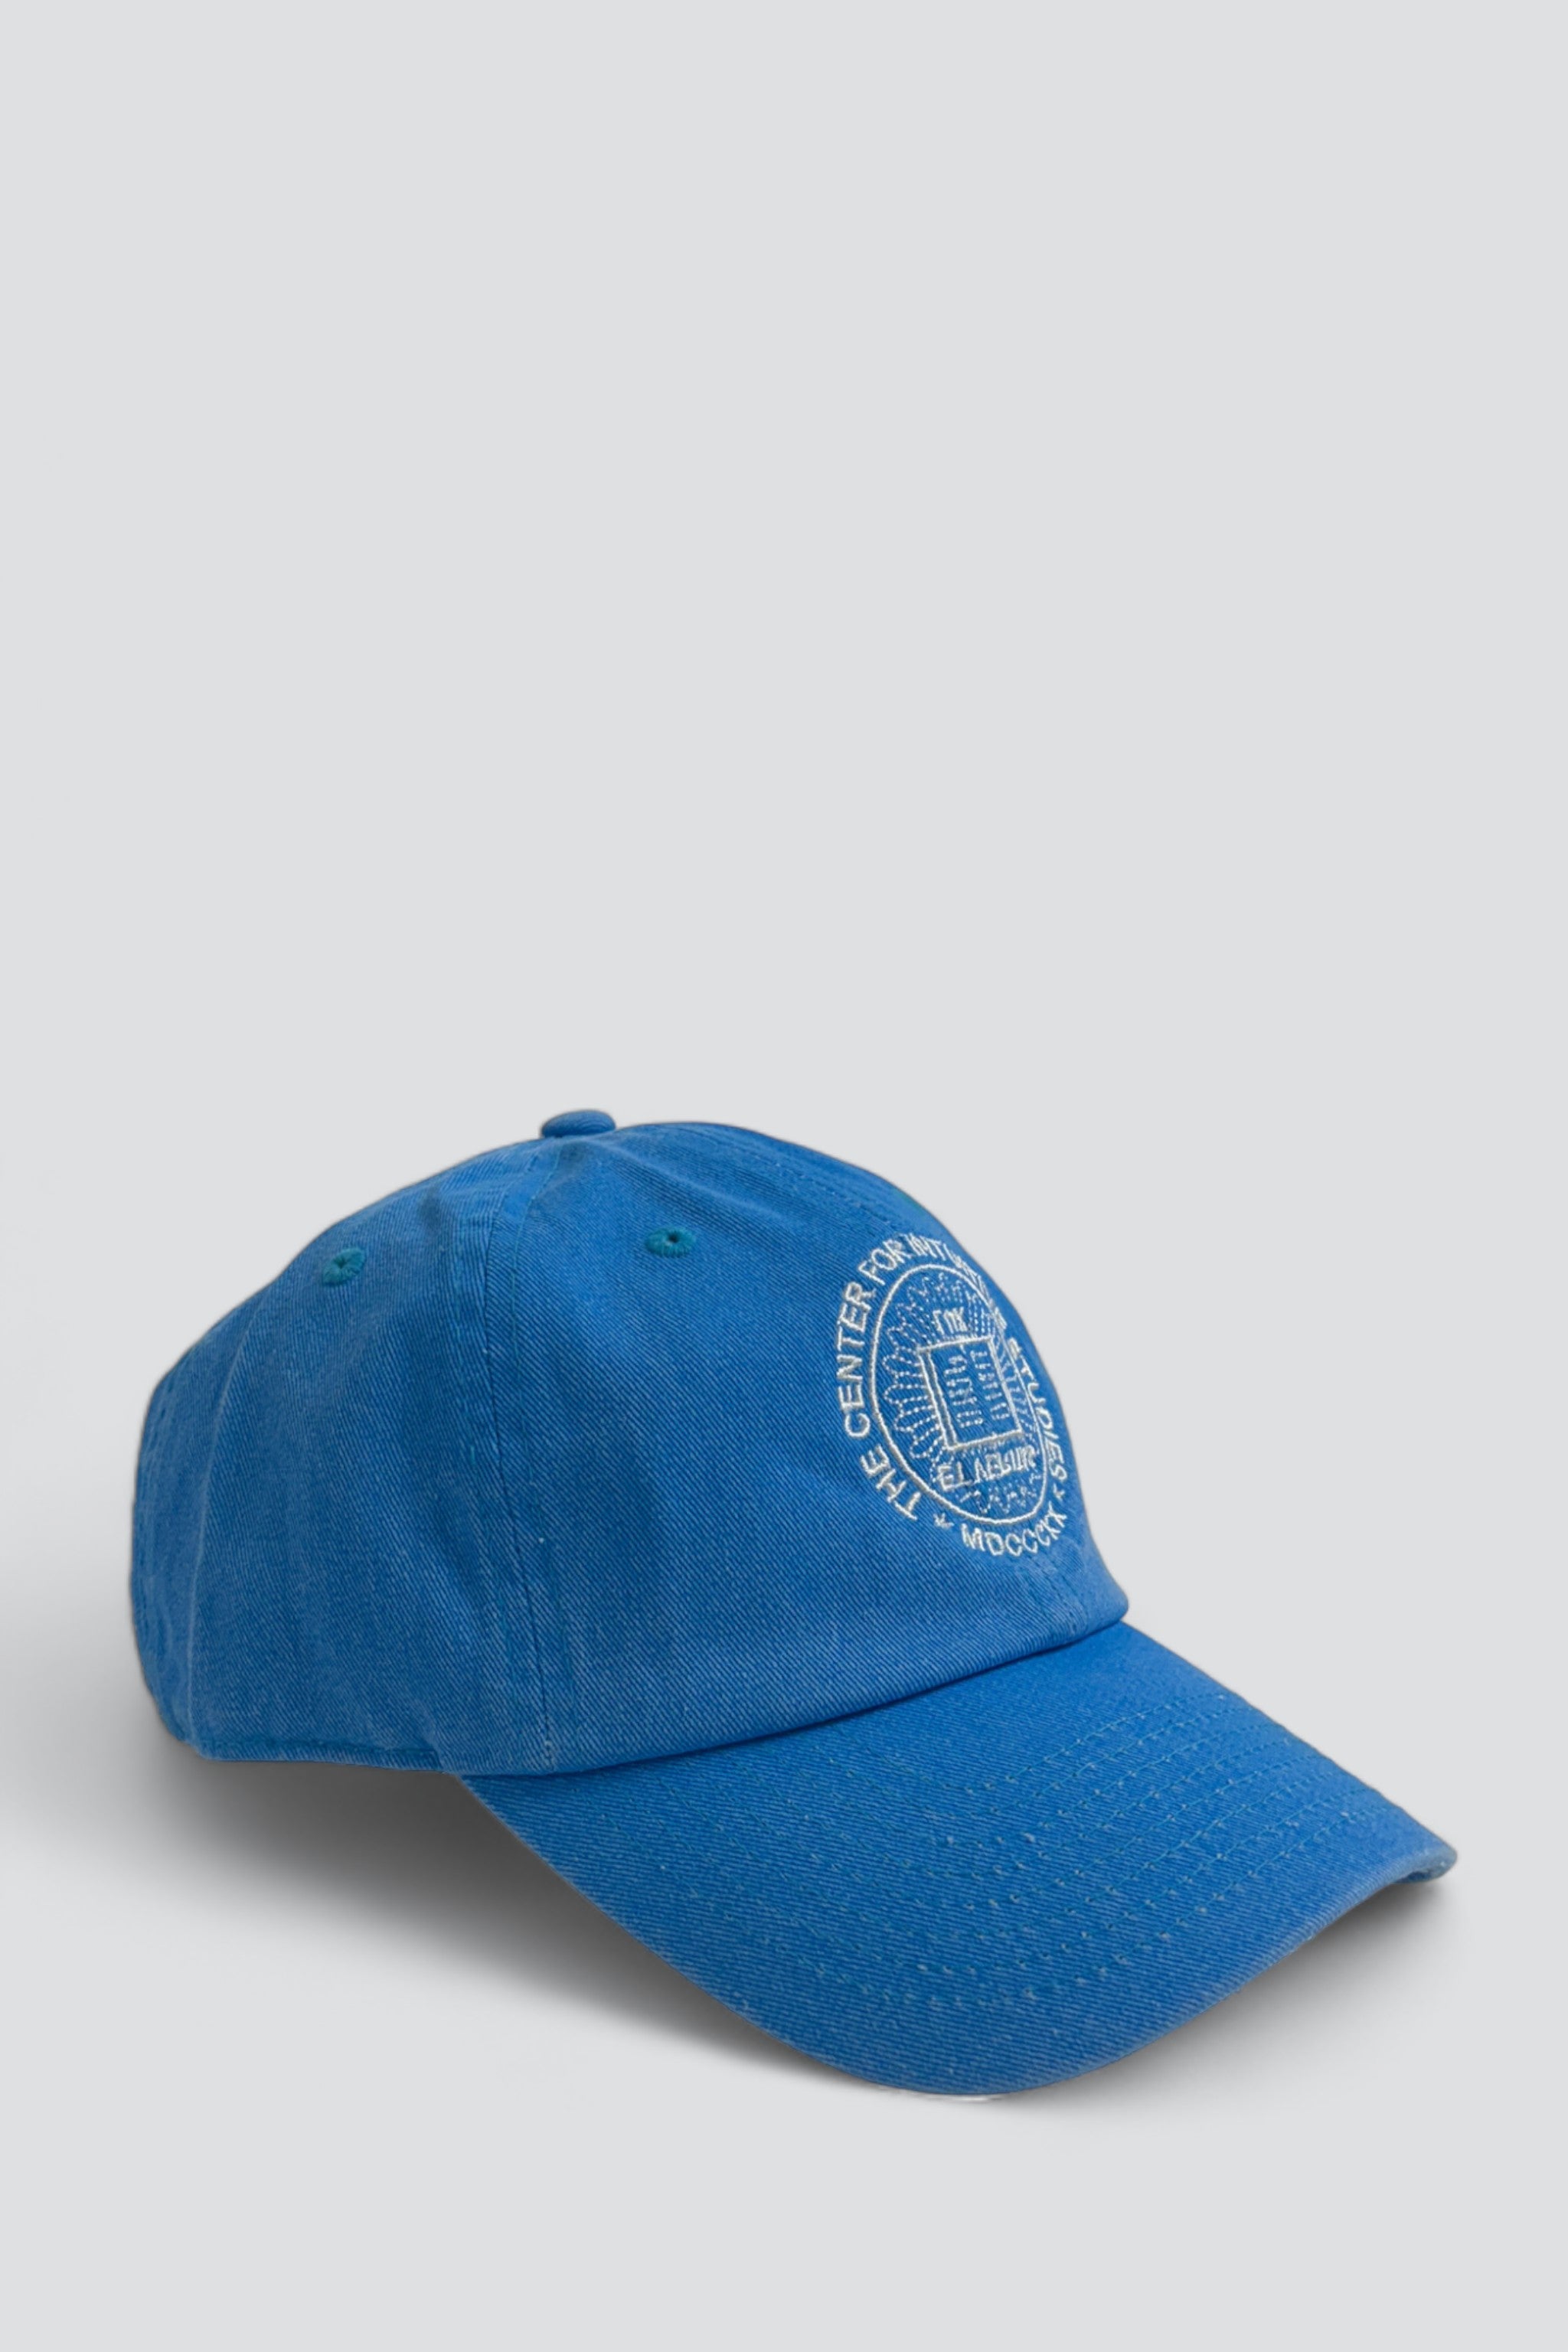 The Center for Intuitive Studies Circle Logo Hat - Neon Blue/White